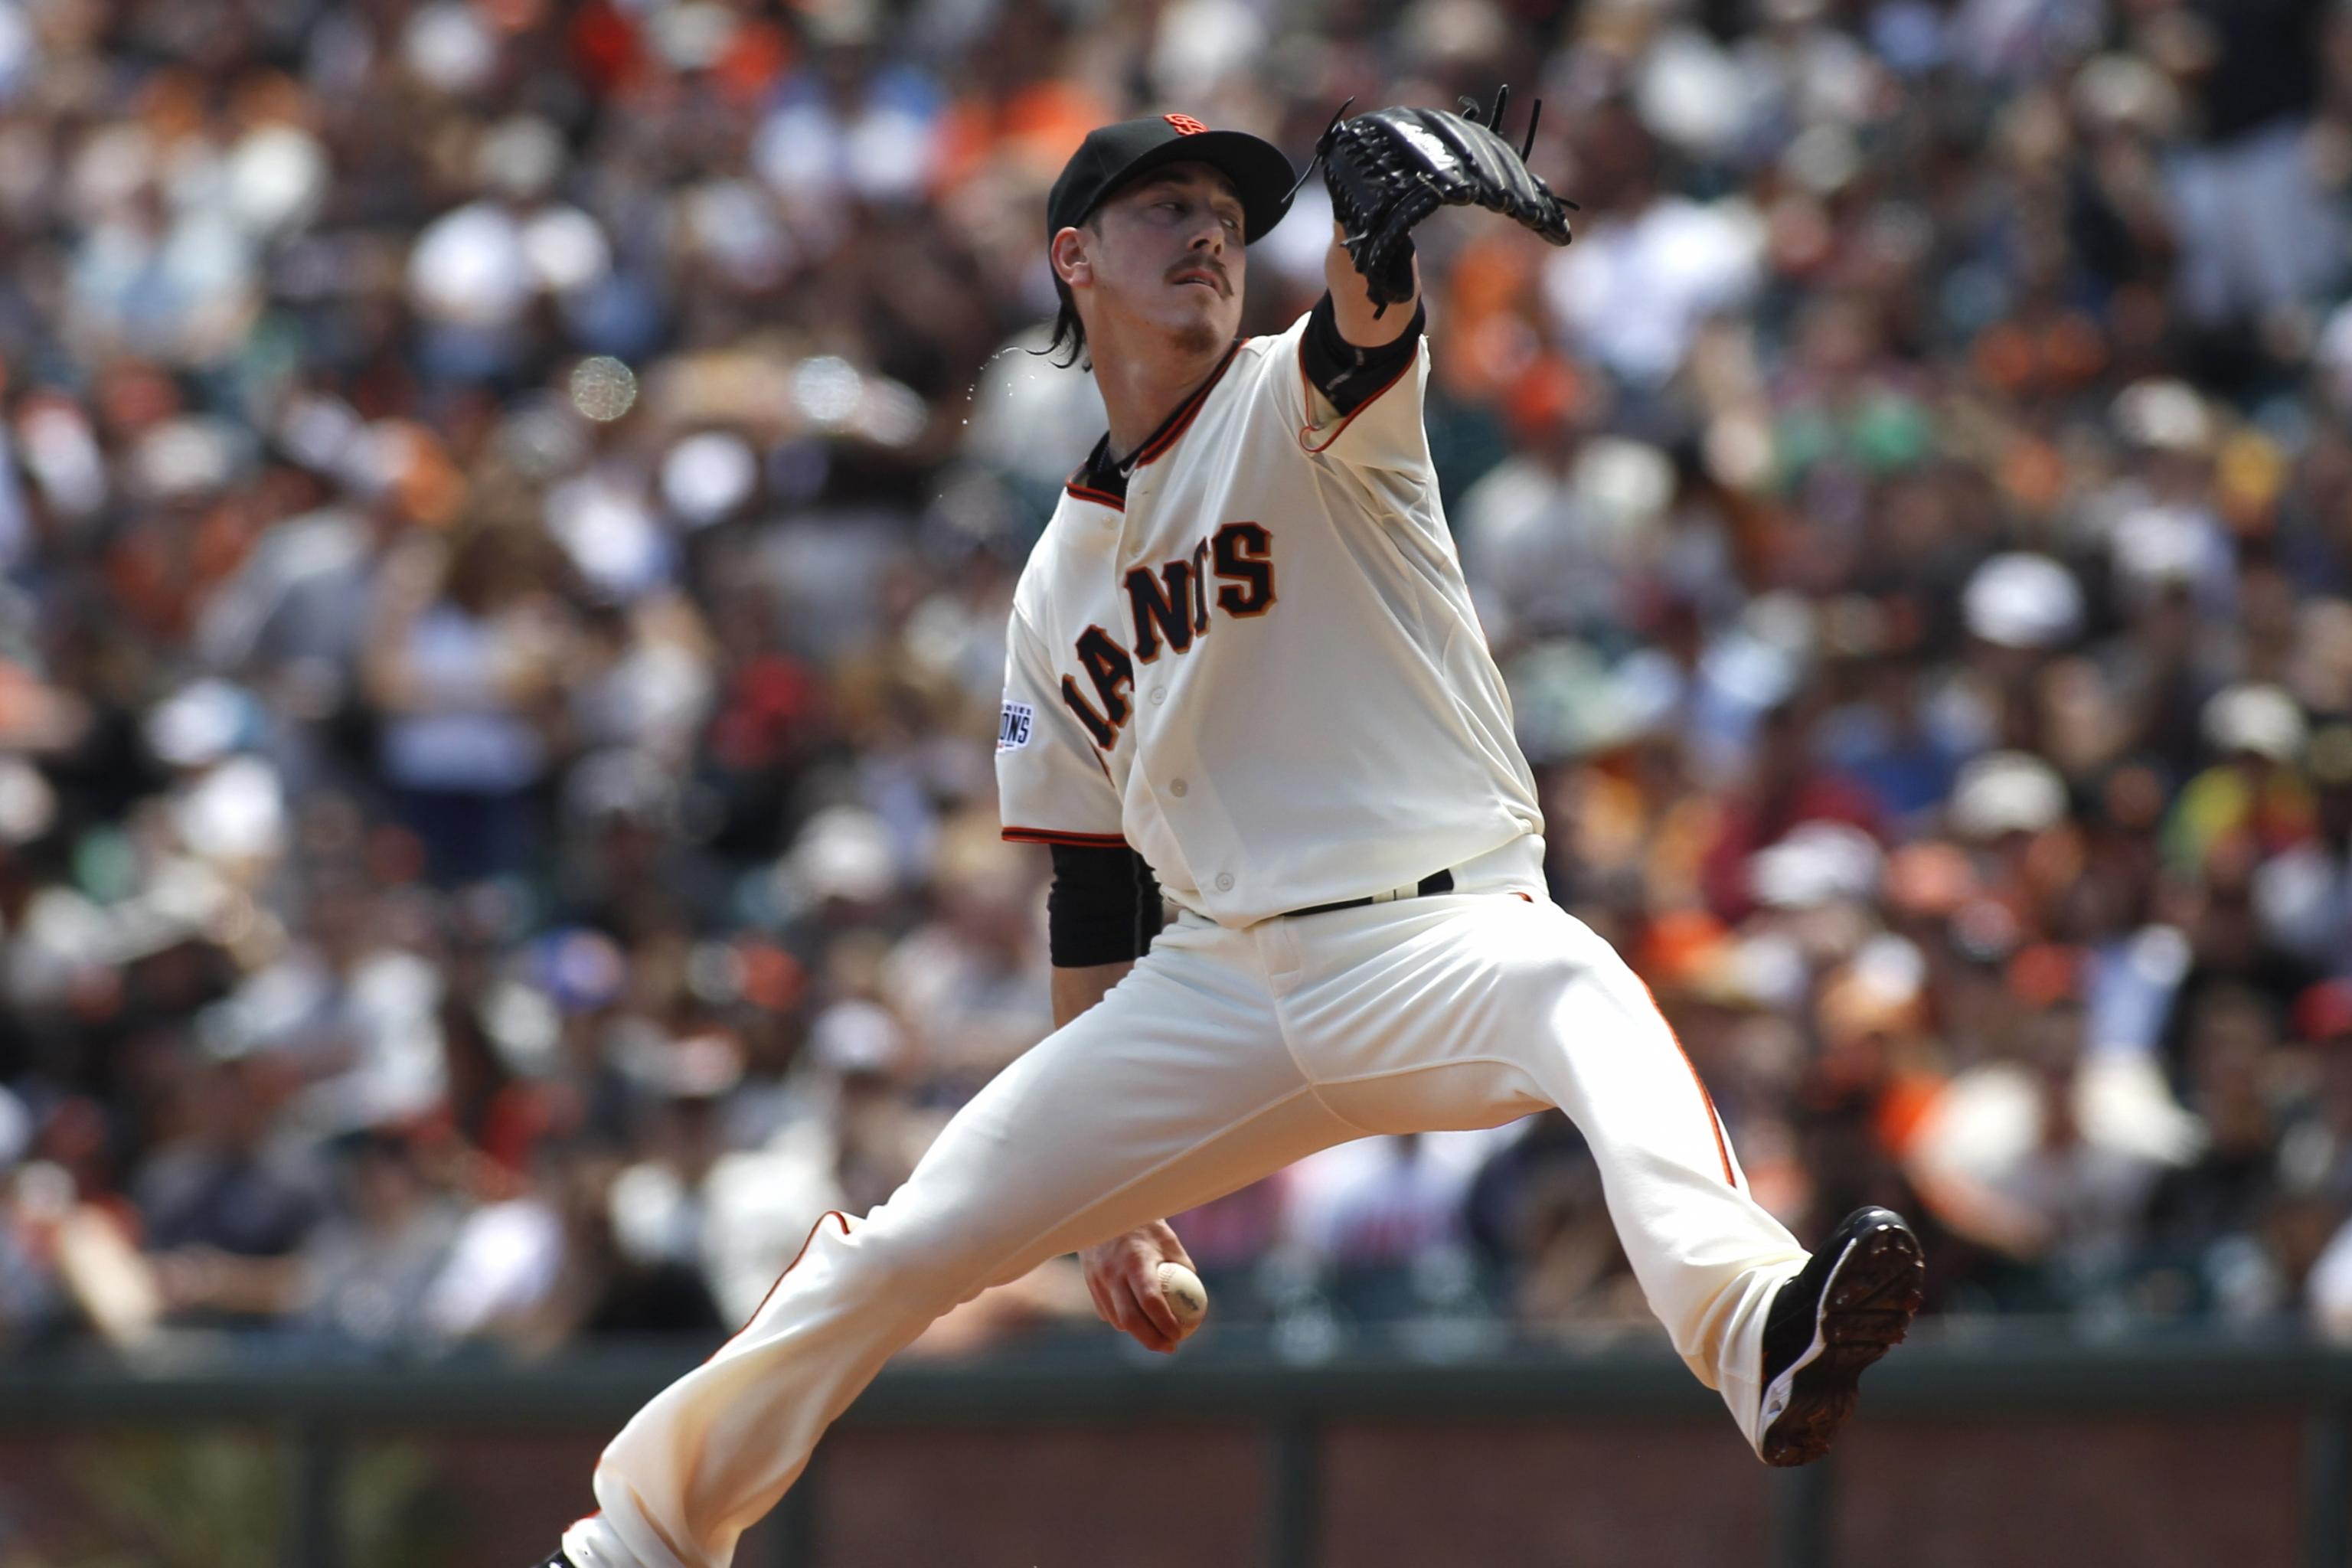 Angels Acquire Aging Pitcher Tim Lincecum